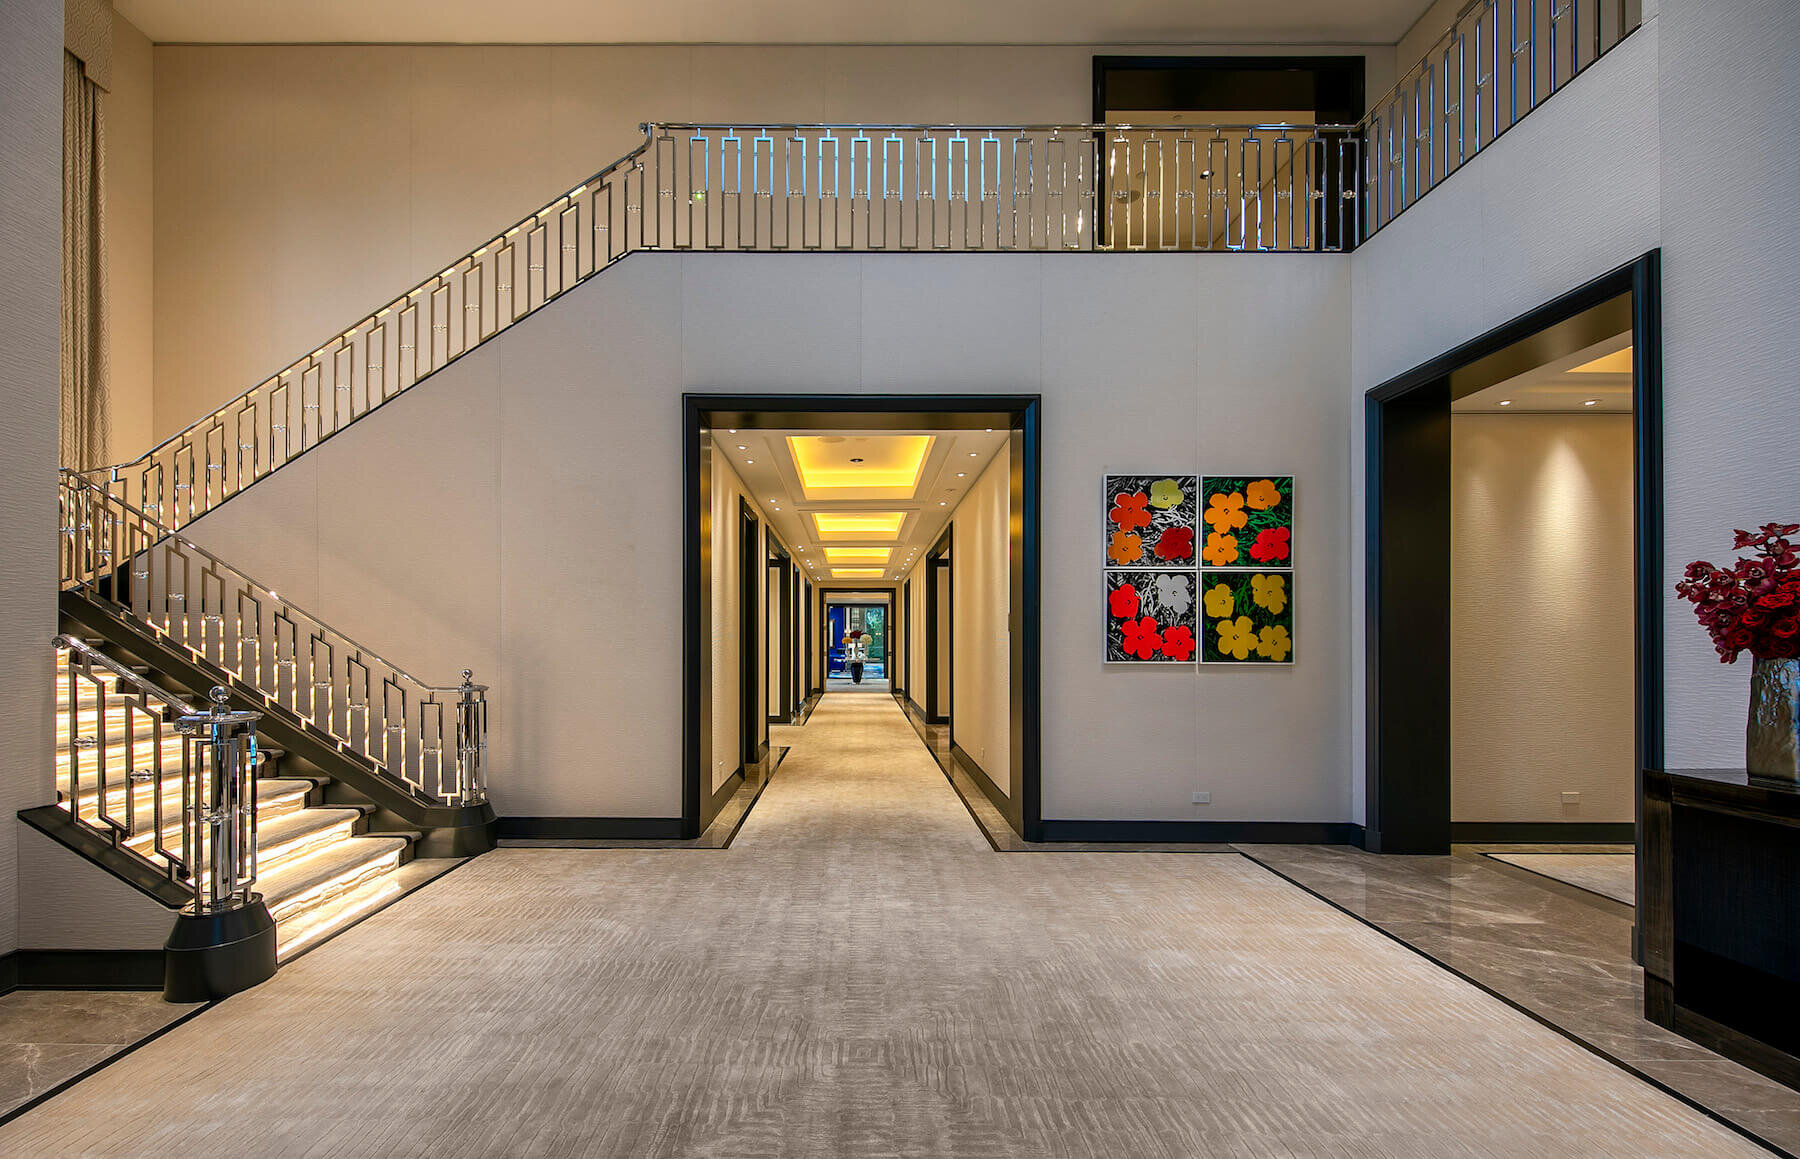 The entry foyer to the estate, filled with wall upholstery and a price art collection.